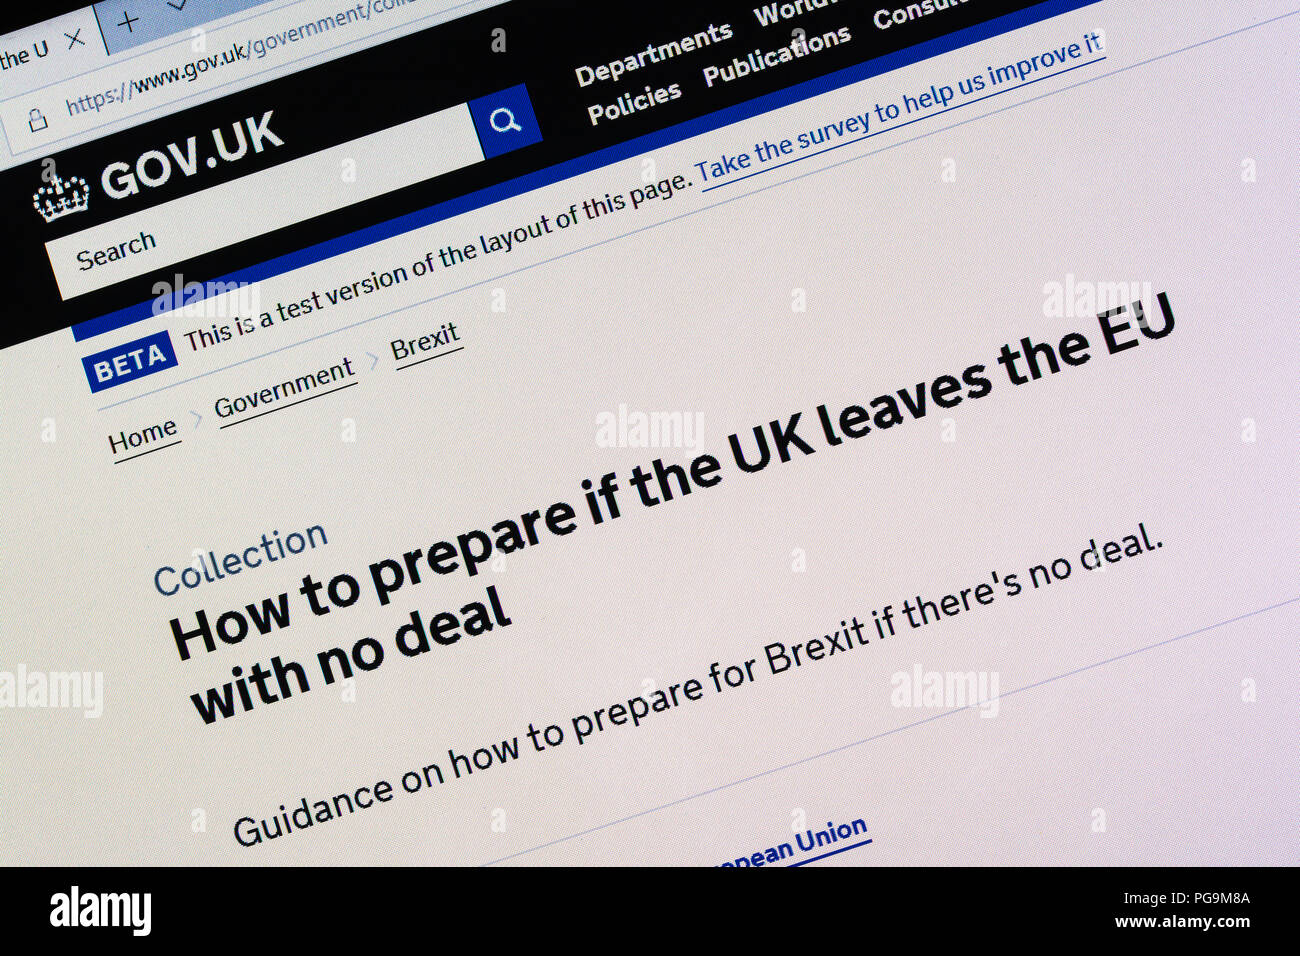 Gov.uk website screenshot displaying information about the UK government's preparations for a no deal Brexit scenario, August 2018 Stock Photo